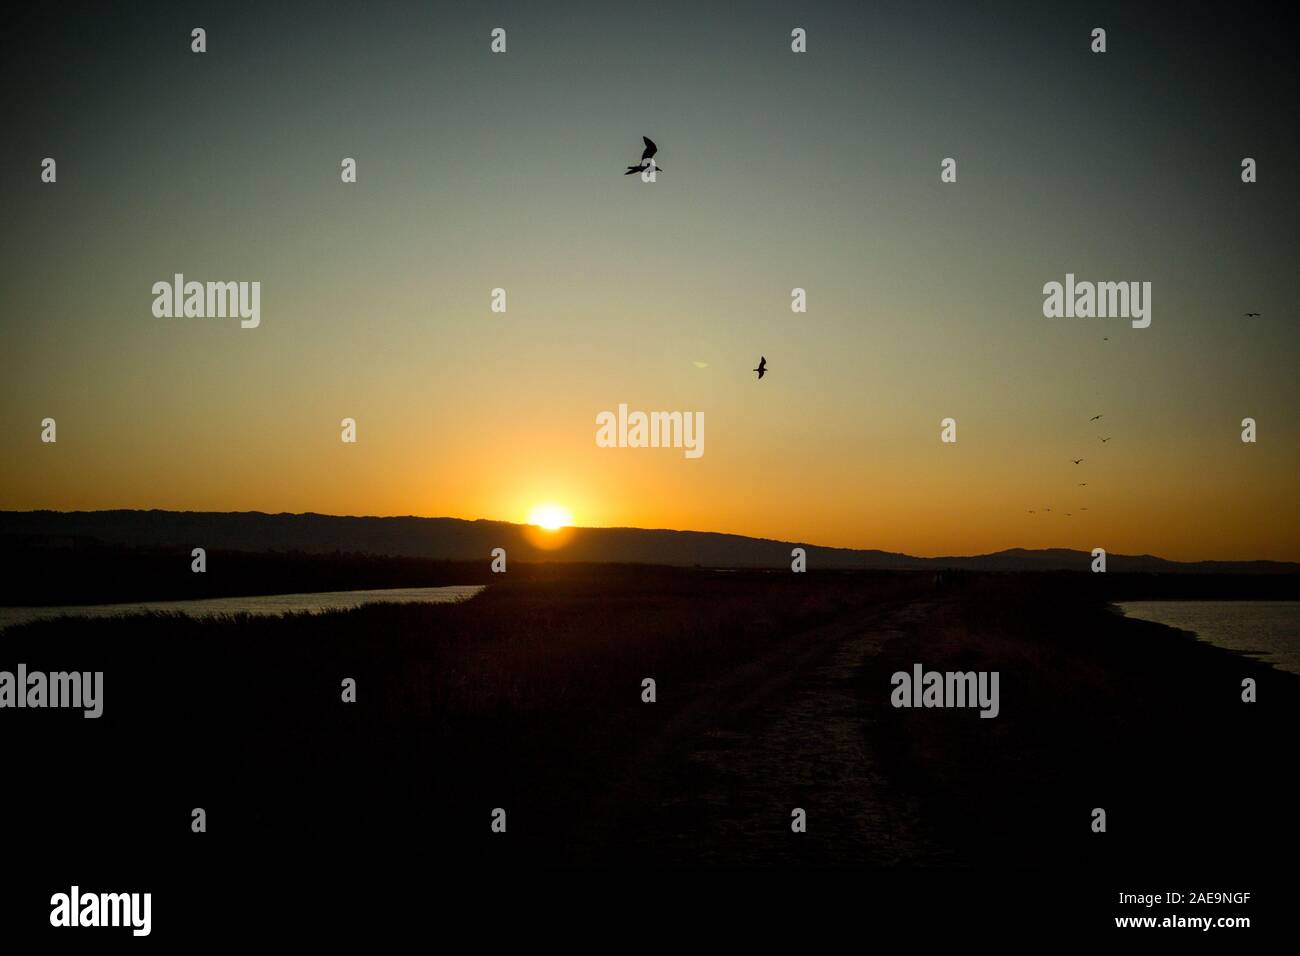 Silhouette of birds at dusk flying over salt flats on San Fransisco bay, as sun sets behind mountain Stock Photo